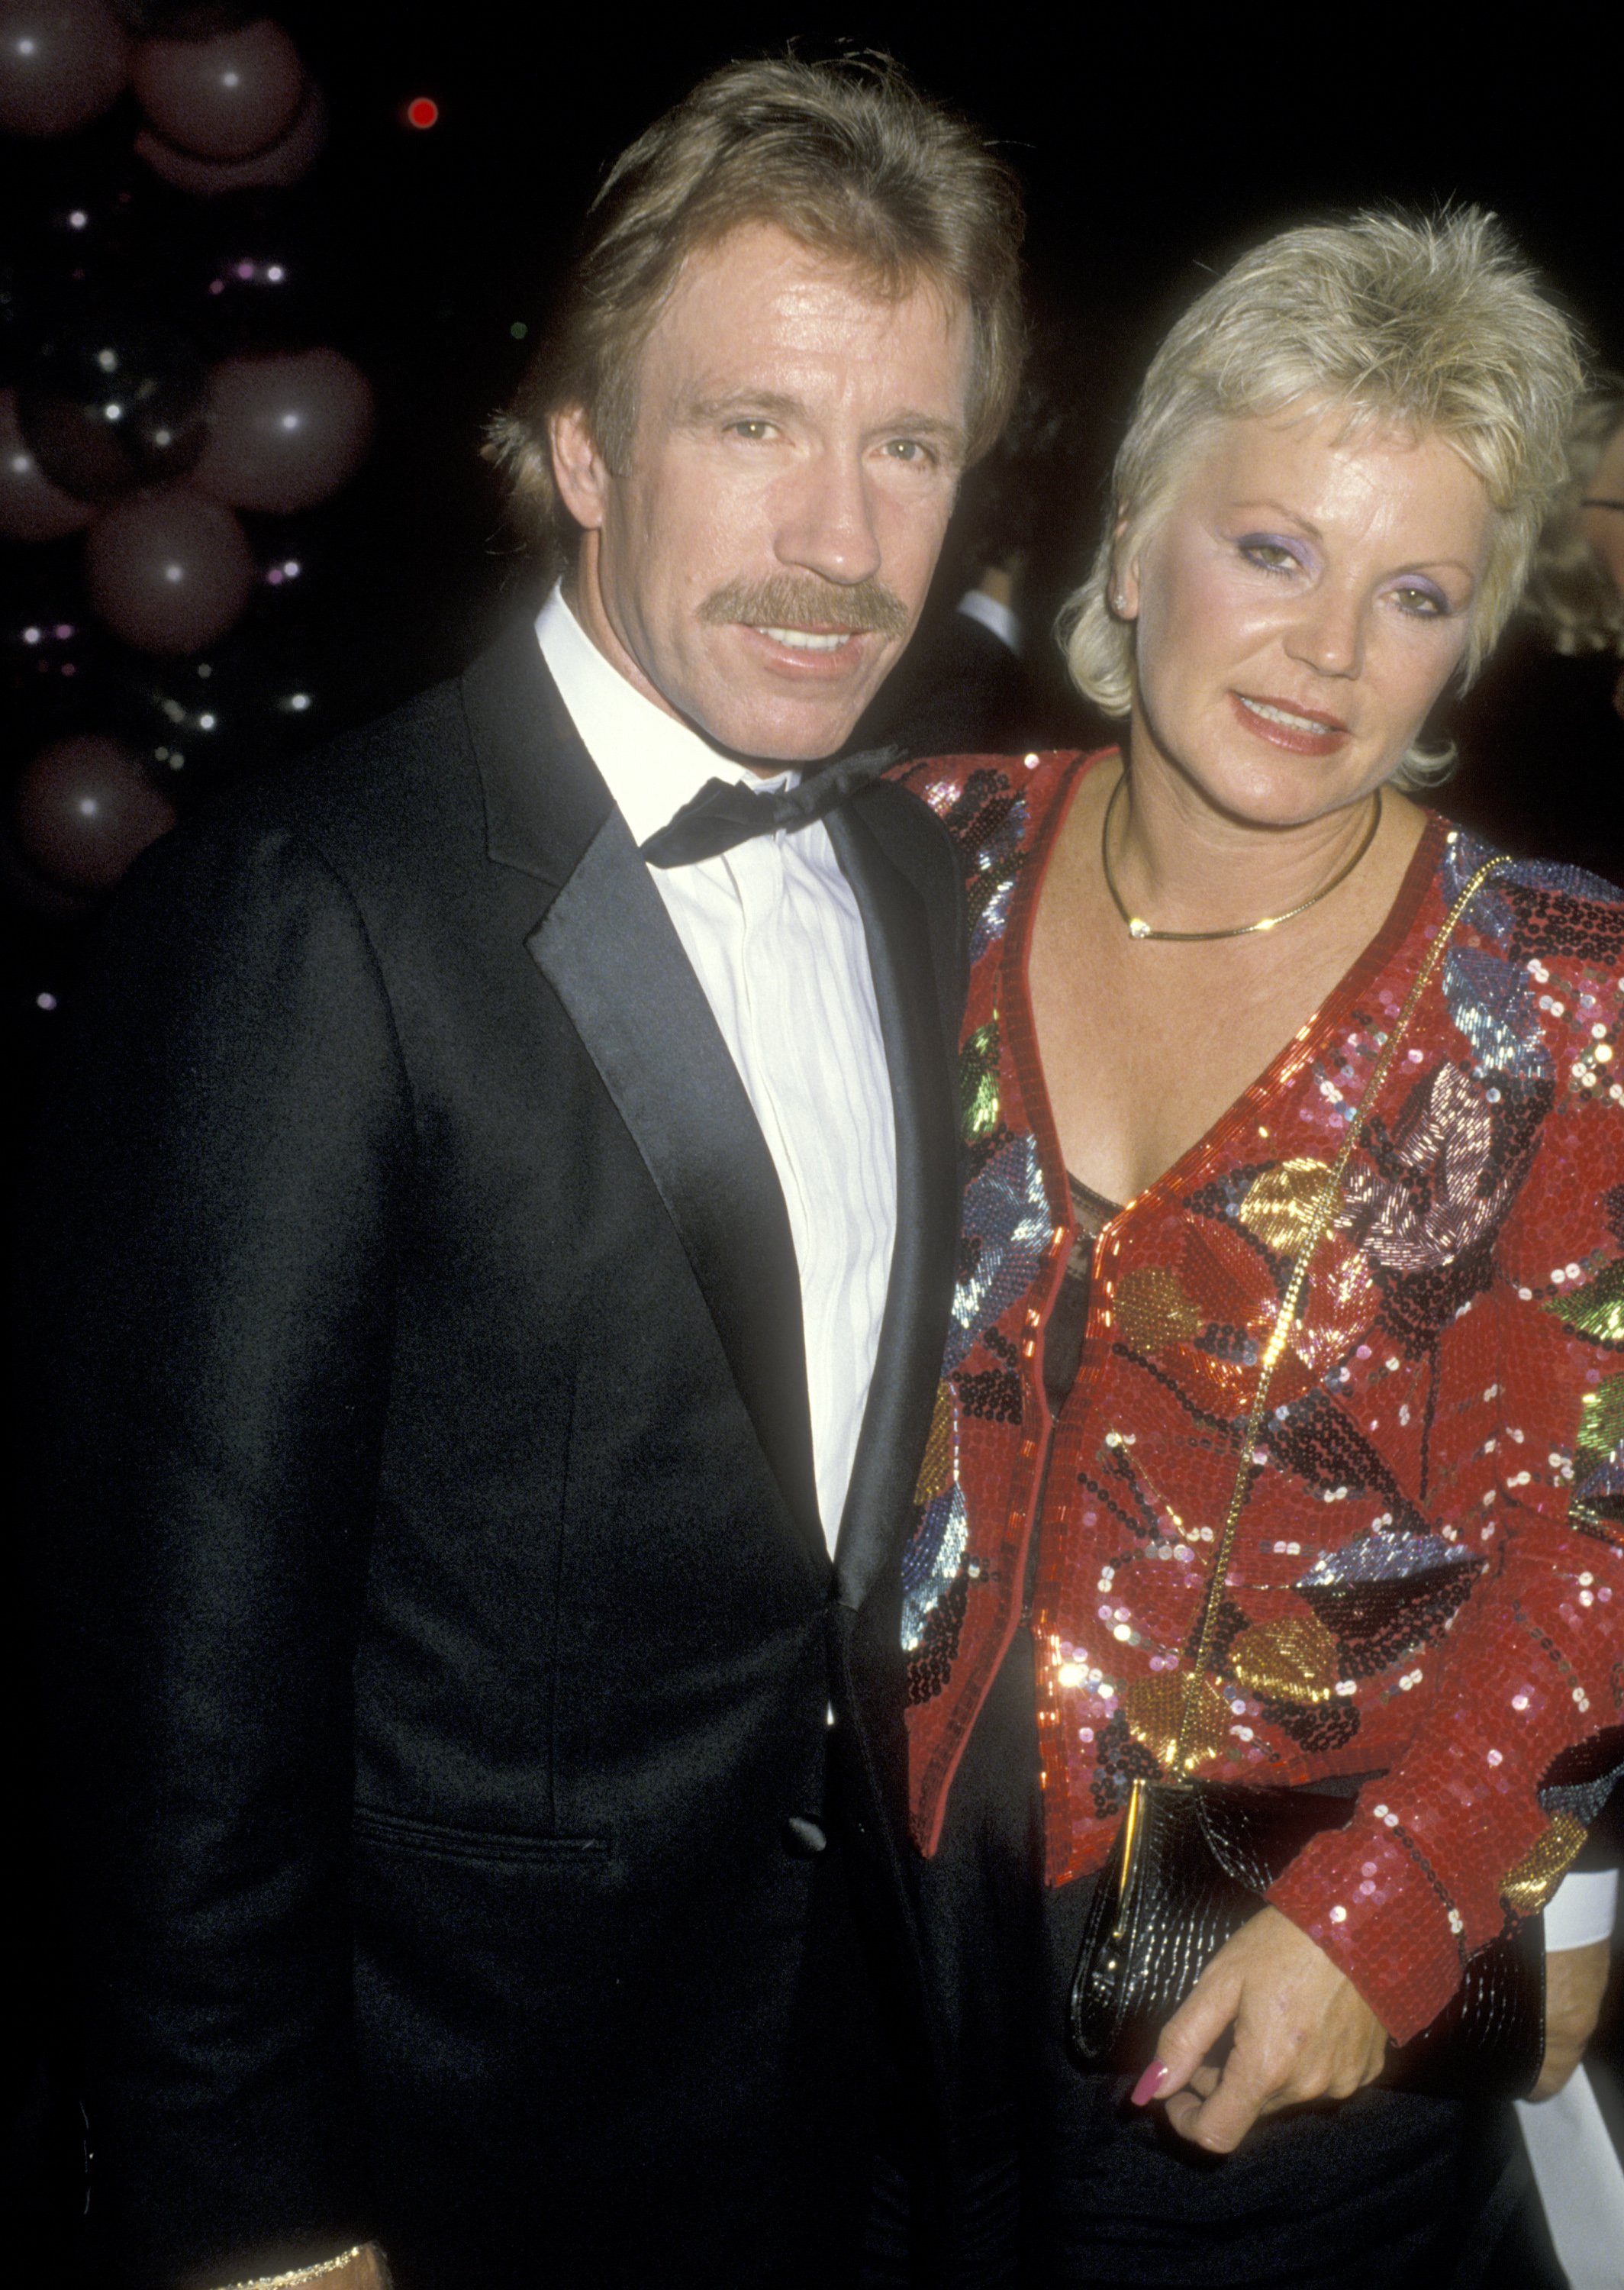  Chuck Norris and Diane Holechek are pictured at "The Naked Cage" Hollywood Premiere on February 22, 1986, at Cannon Films Headquarters in Hollywood, California | Source: Getty Images